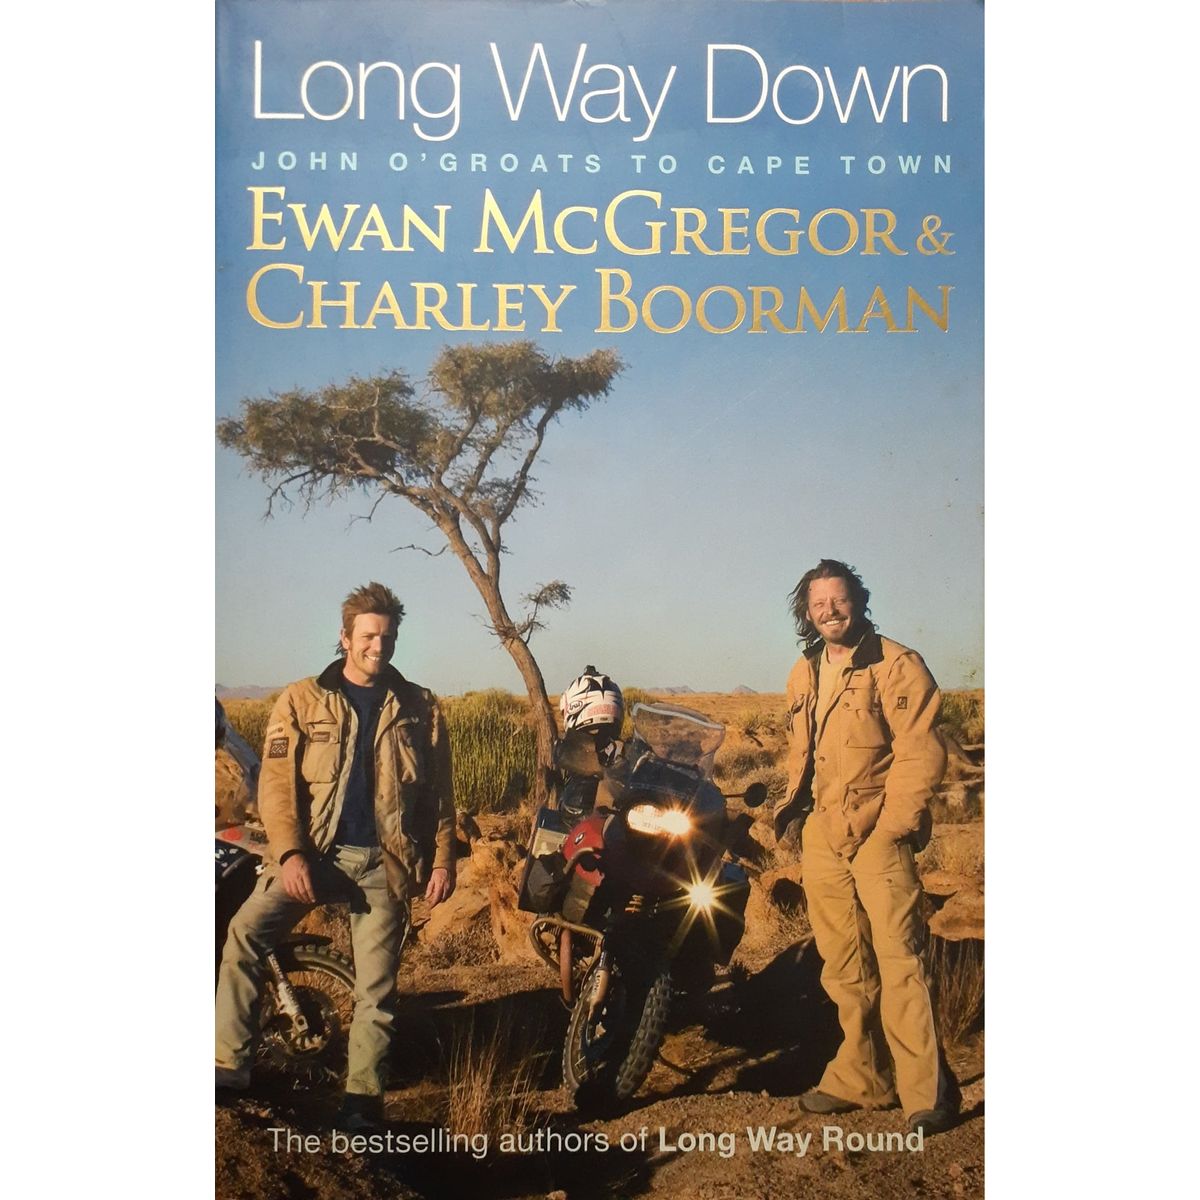 ISBN: 9780751538953 / 0751538957 - Long Way Down: John O'Groats to Cape Town by Ewan McGregor and Charley Boorman [2008]